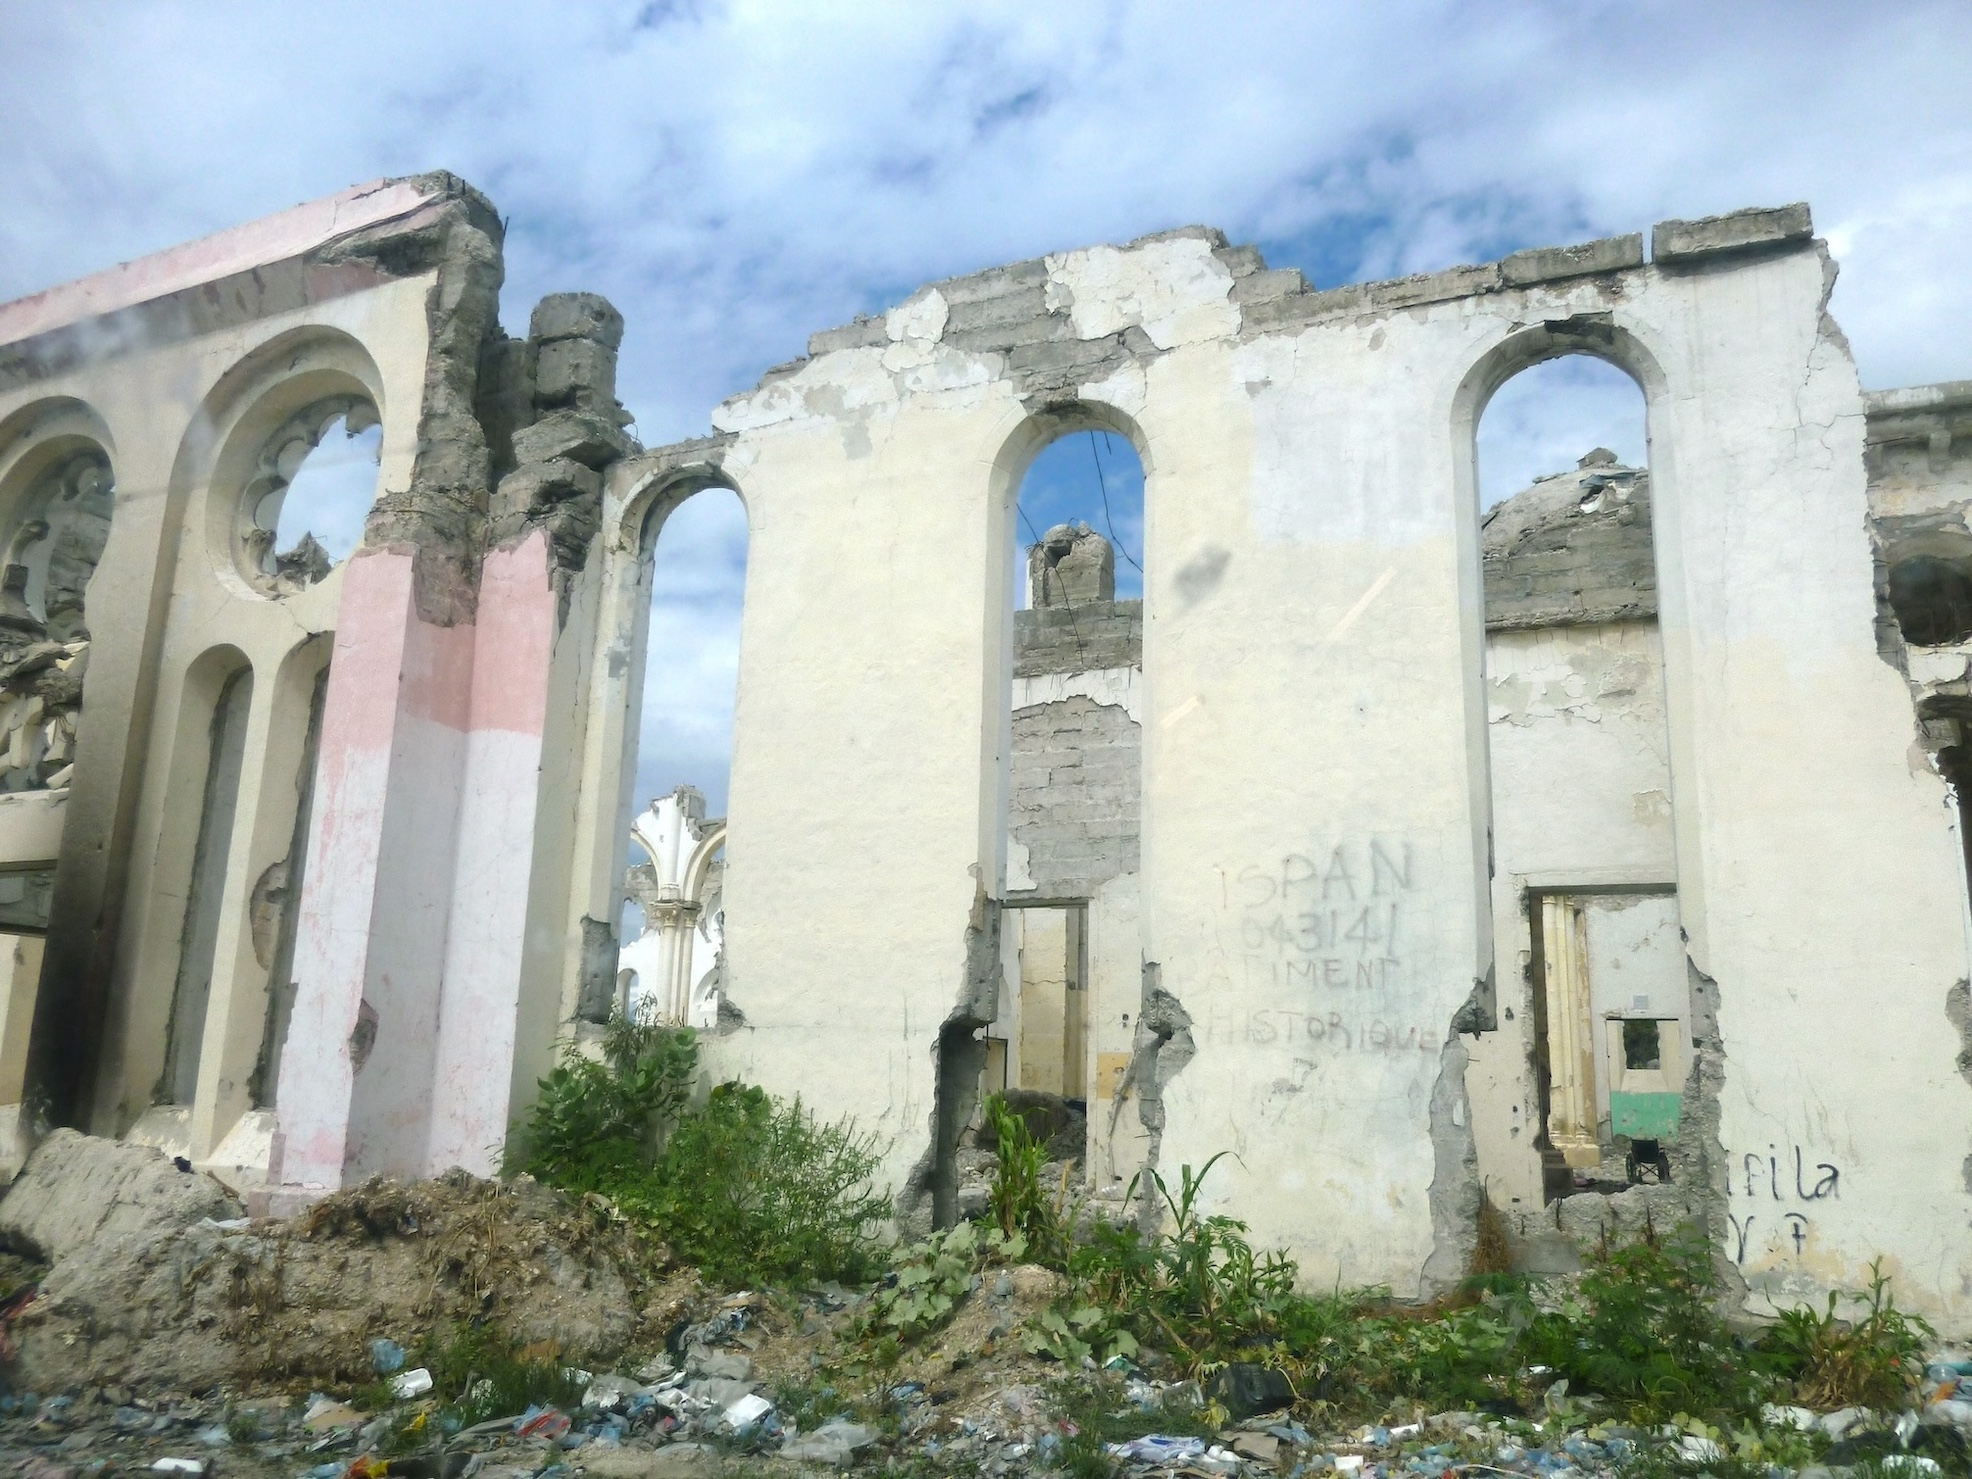  Port-au-Prince cathedral destroyed by the 2010. Photo by Sandrine Revet